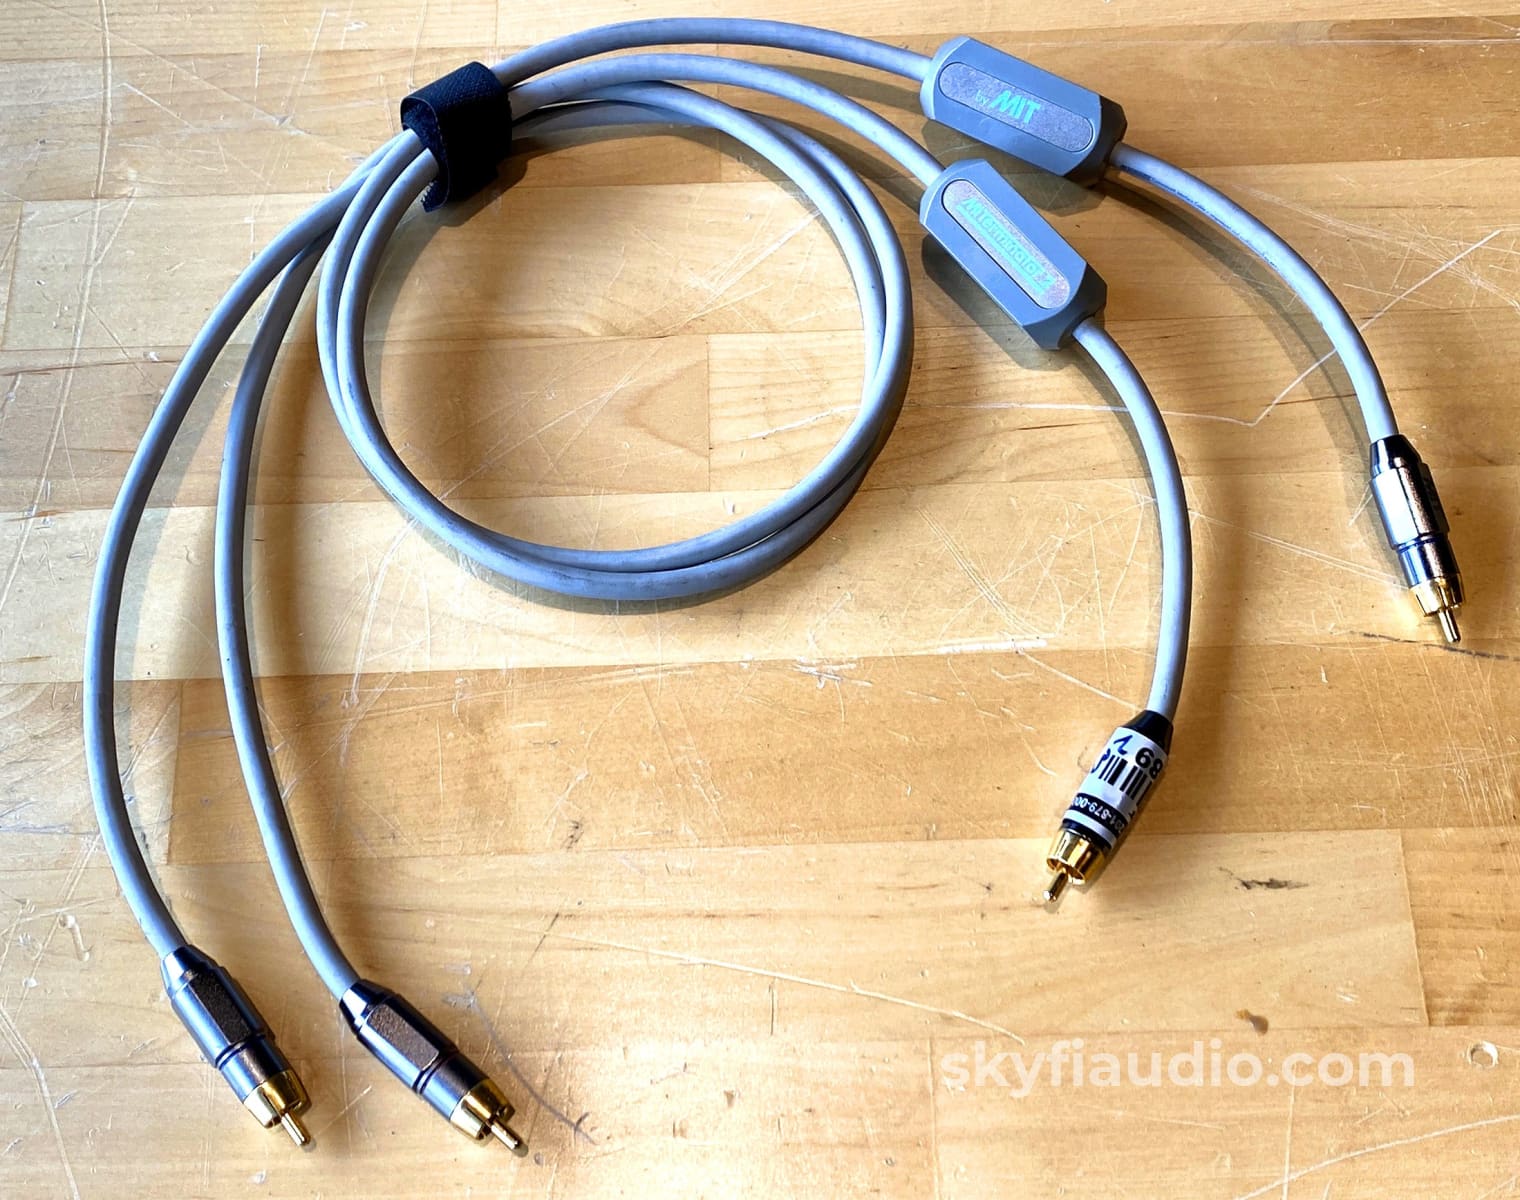 Mit Terminator 2 Audio Cable Stereo Rca - 1M Cables